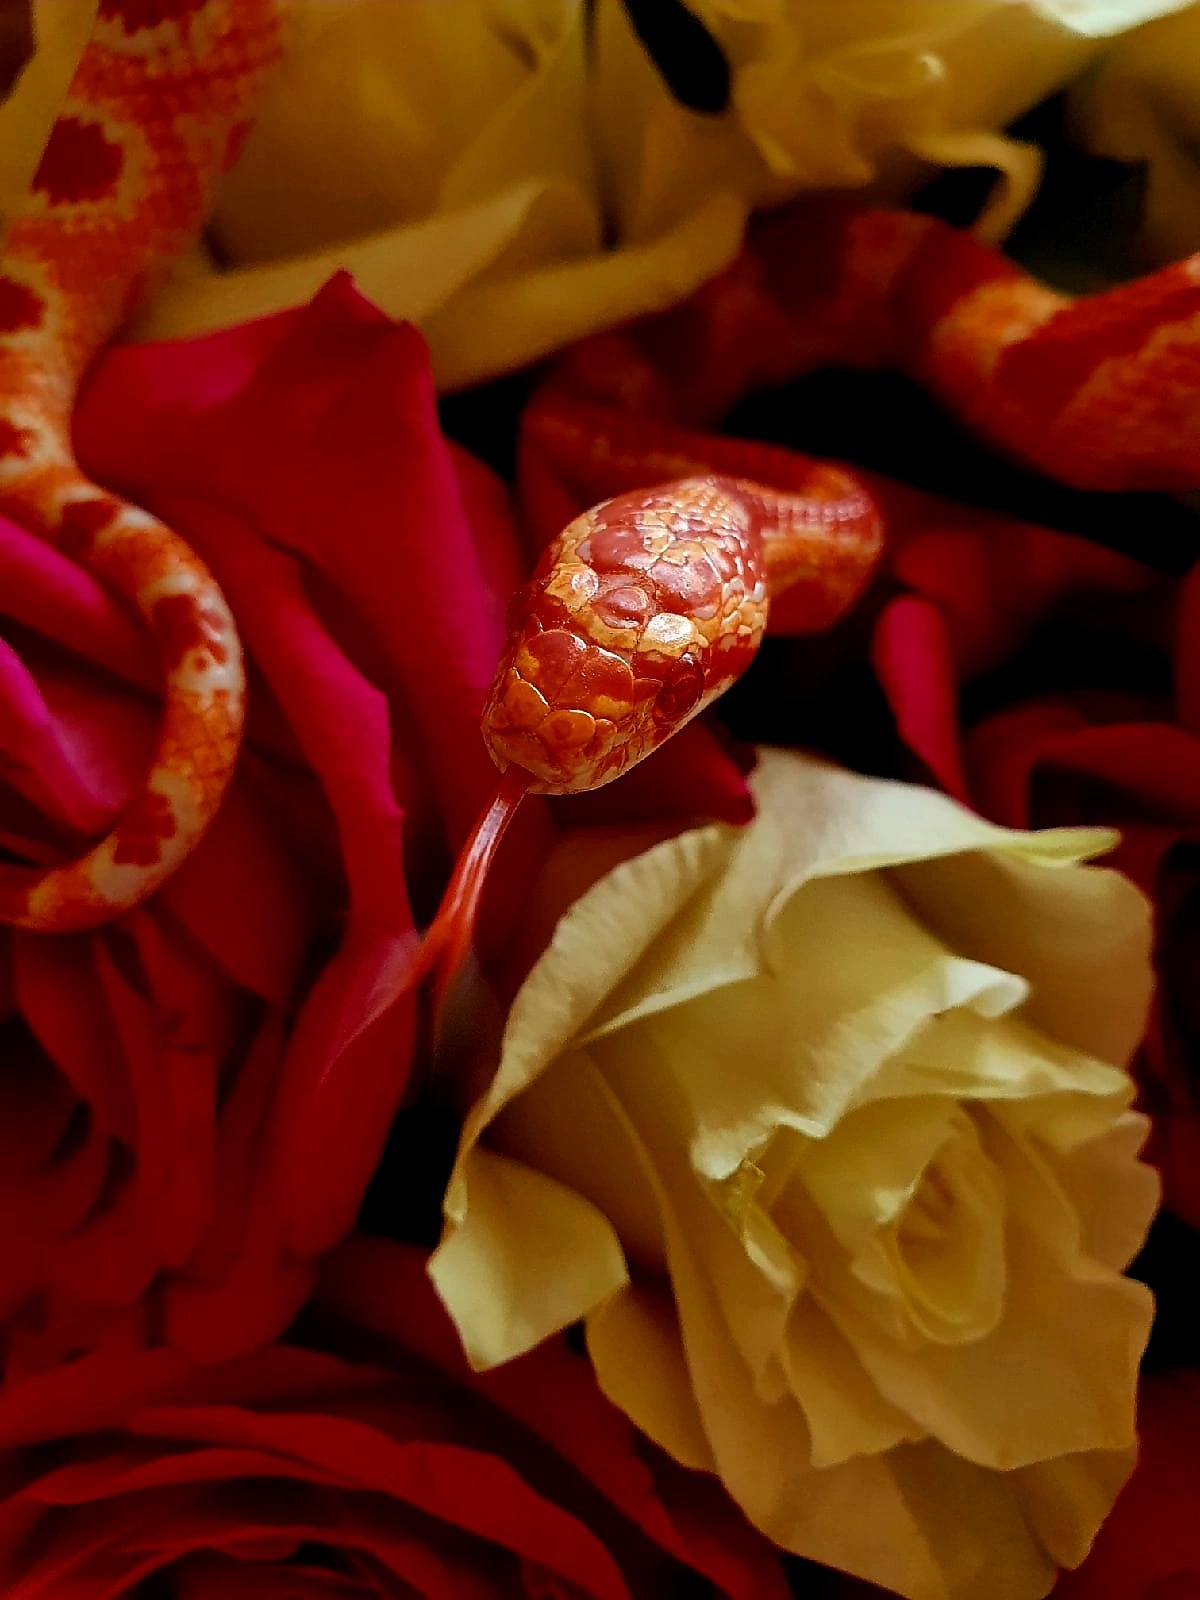 My Two Snakes) - My, Boa, Imperial boa constrictor, Maize snake, Skid, Snake, Terrariumistics, Flowers, Mobile photography, Longpost, Reptiles